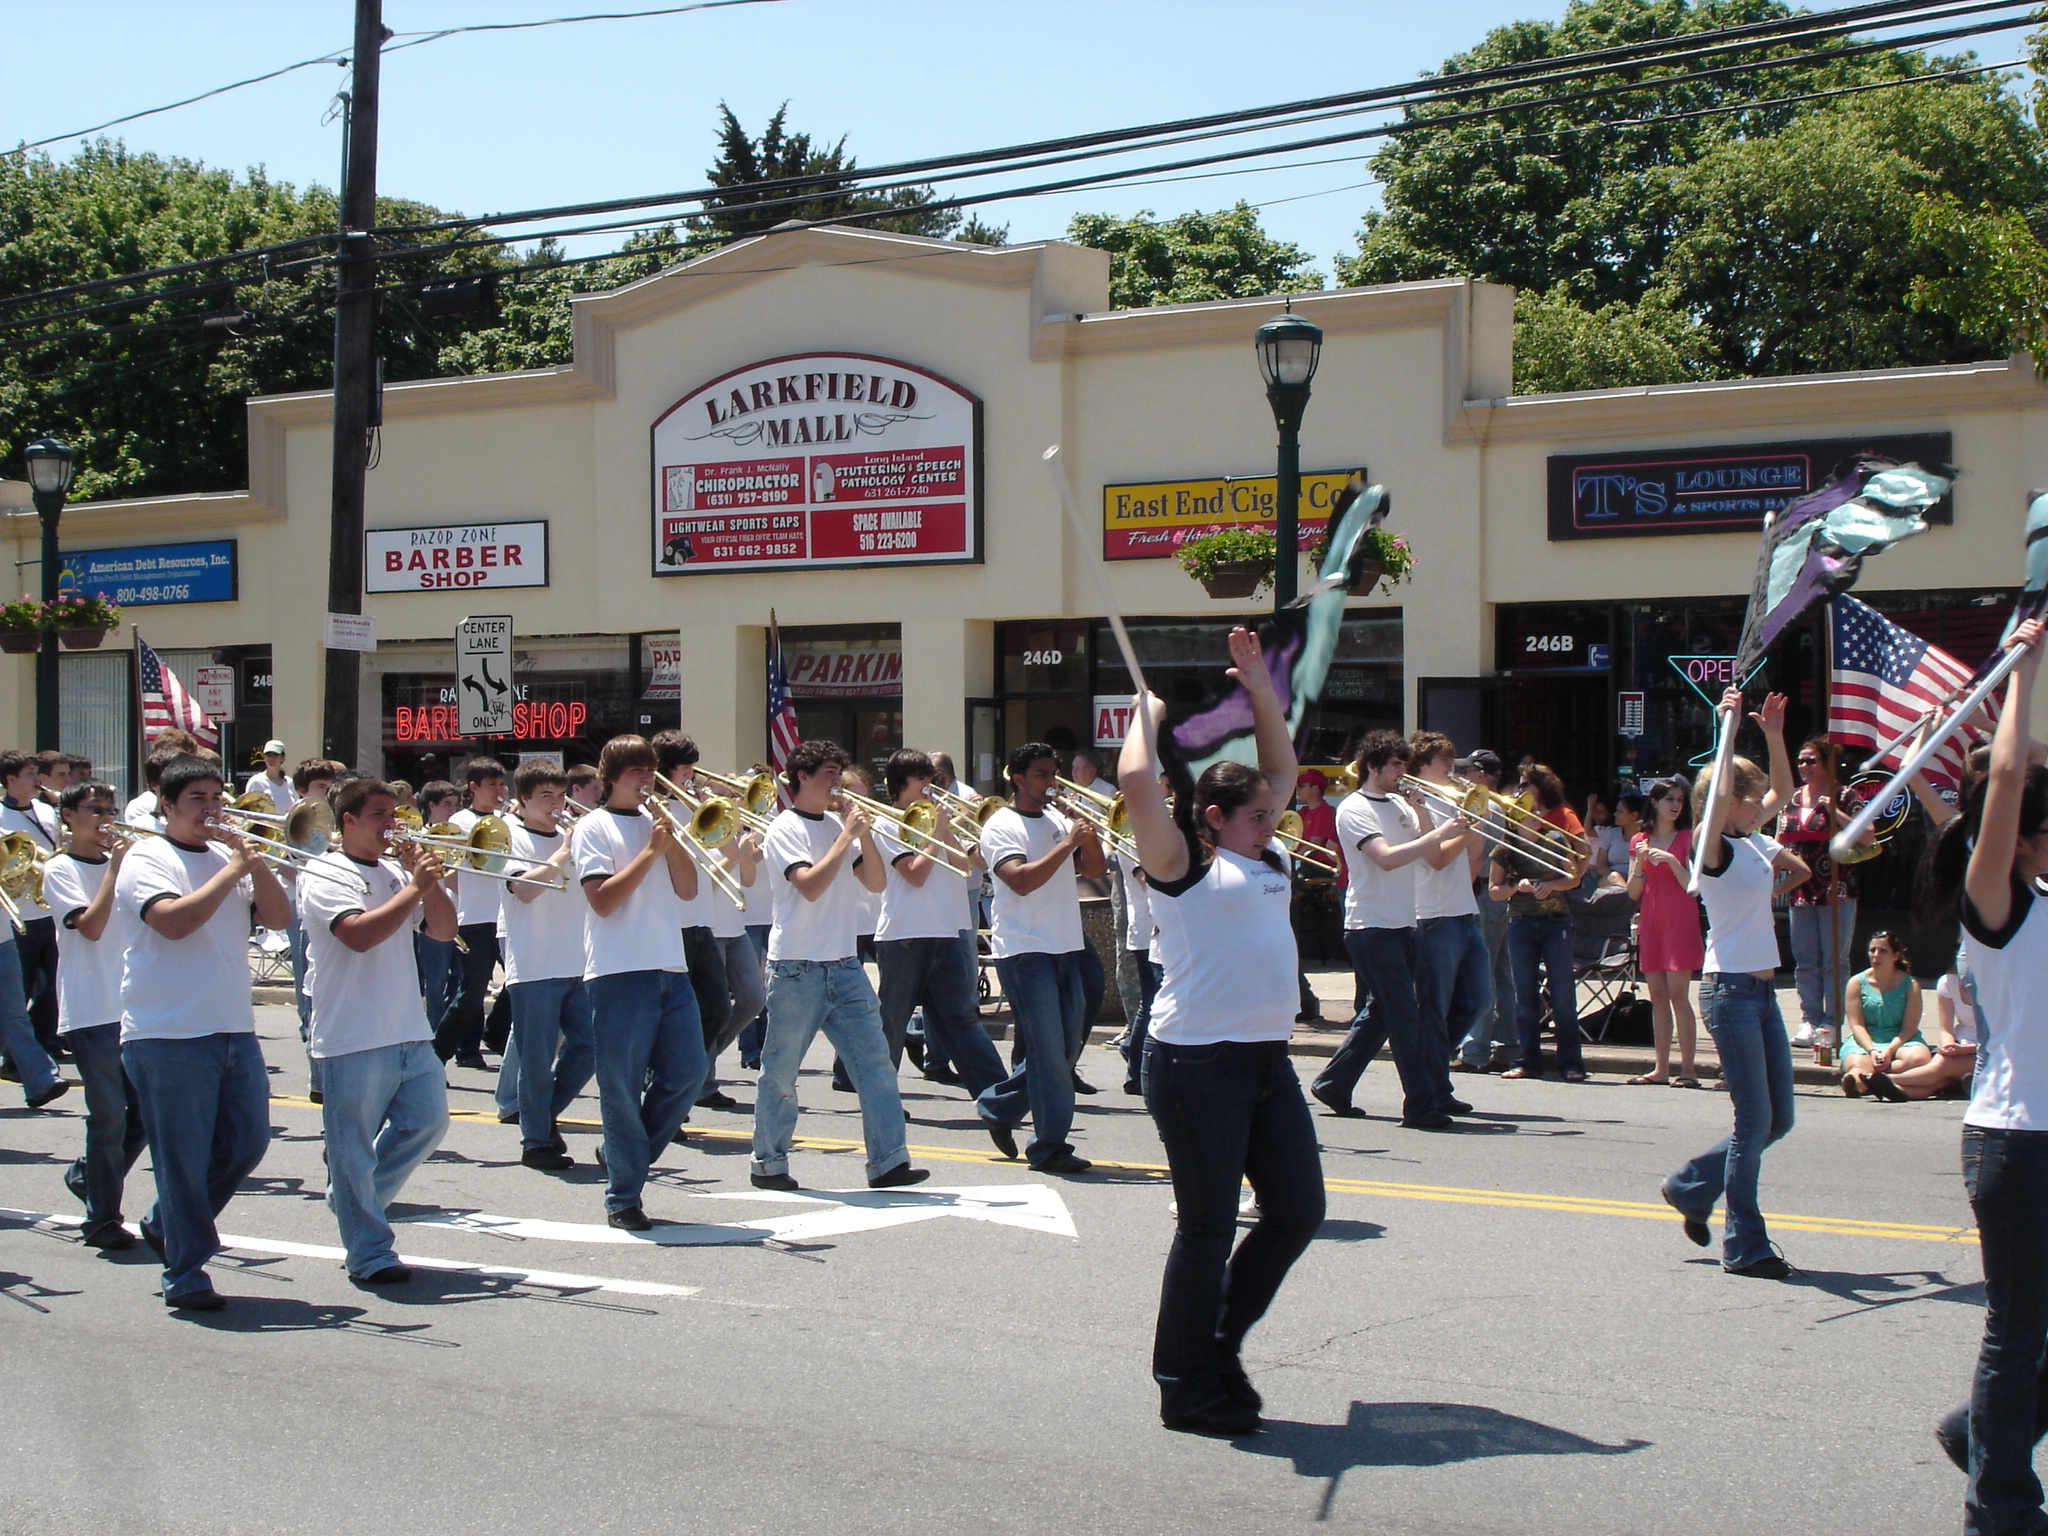 marching band performing on street in city area